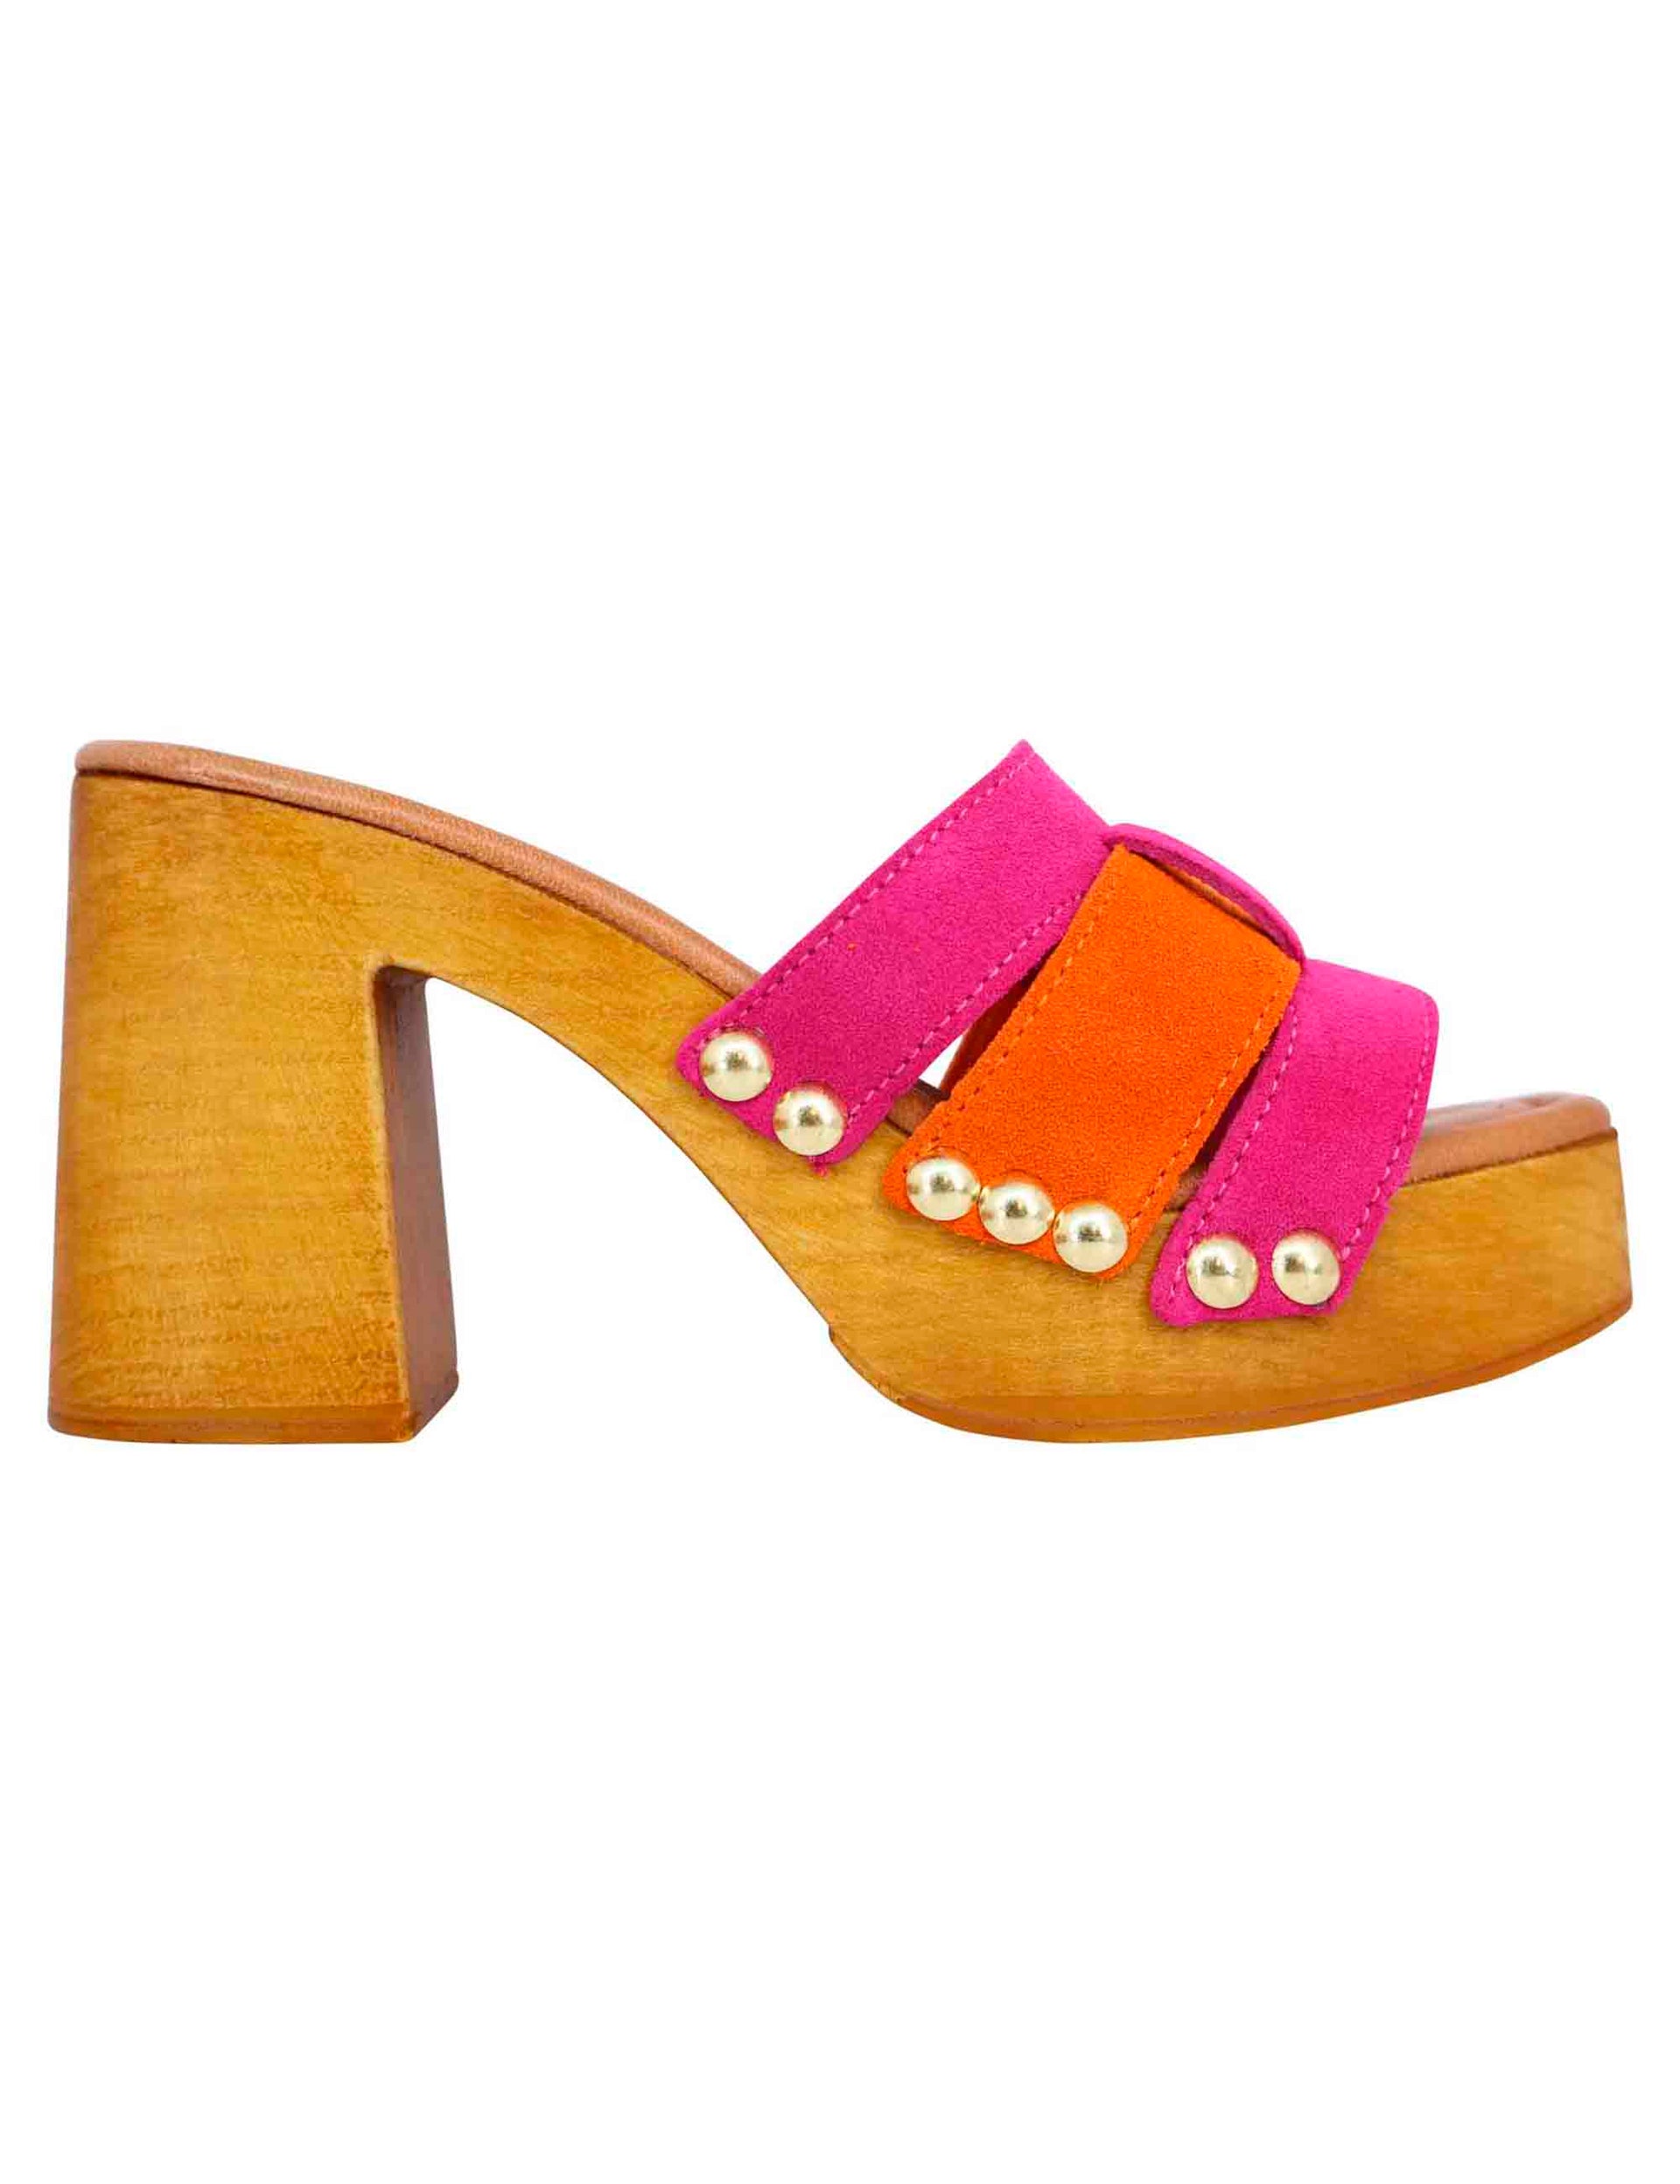 Women's clog sandals in fuchsia suede with high heel and padded insole